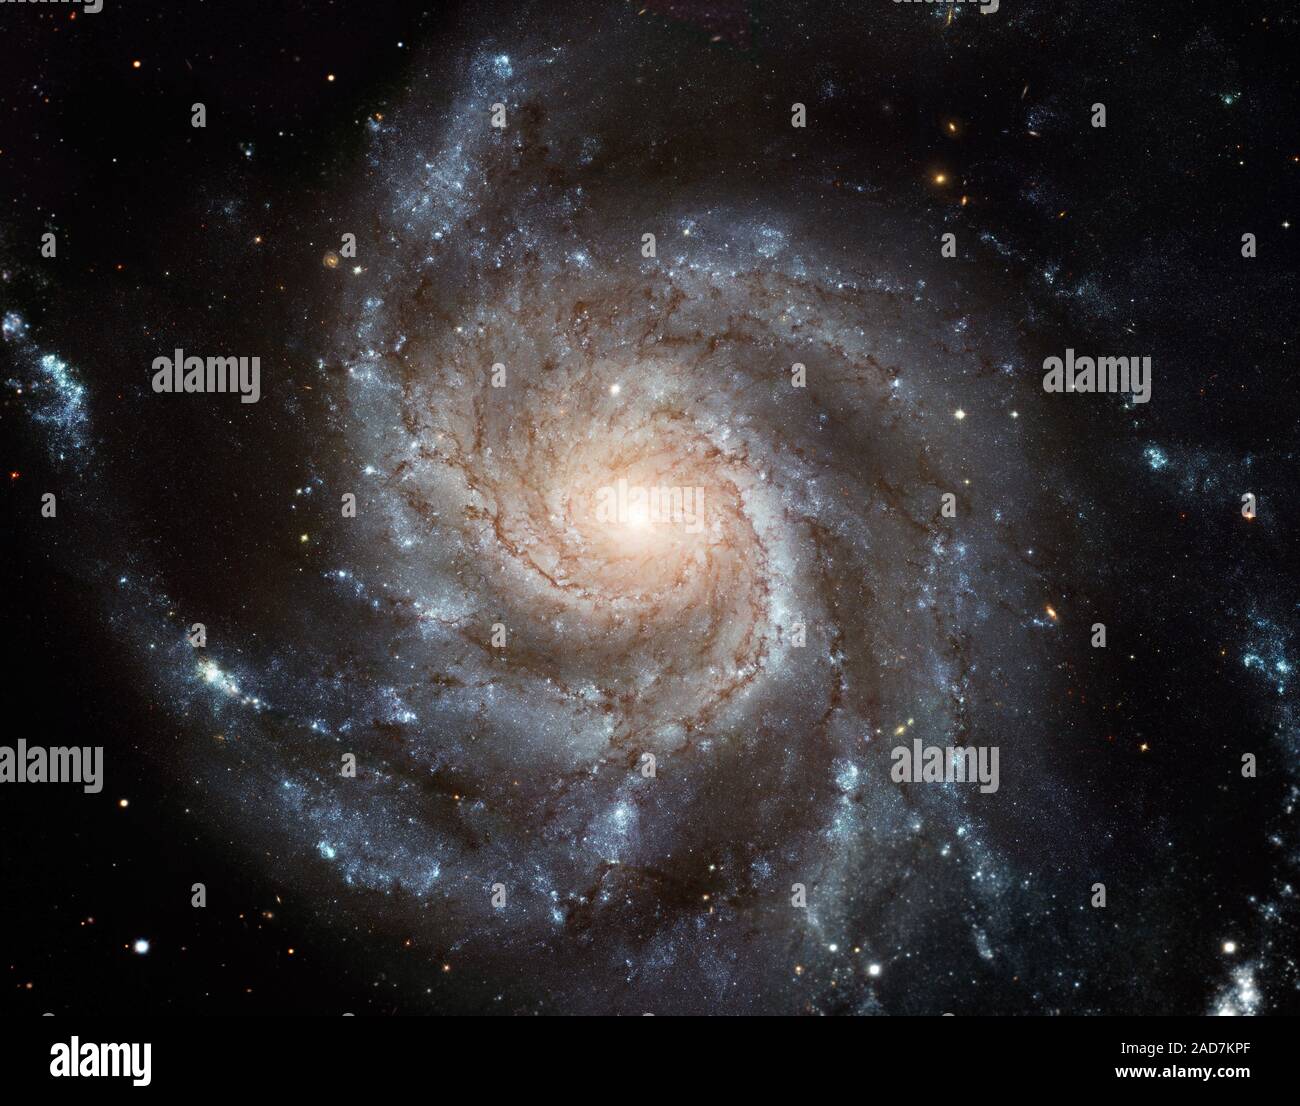 This giant spiral disk of stars, dust and gas is 170,000 light-years across, or nearly twice the diameter of our Milky Way galaxy. M101 is estimated to contain at least one trillion stars. About 100 billion of them could be similar to our Sun. Credit for Hubble Image: NASA, ESA, K. Kuntz (JHU), F. Bresolin (University of Hawaii), J. Trauger (Jet Propulsion Lab), J. Mould (NOAO), Y.-H. Chu (University of Illinois, Urbana), and STScICredit for CFHT Image: Canada-France-Hawaii Telescope/ J.-C. Cuillandre/CoelumCredit for NOAO Image: G. Jacoby, B. Bohannan, M. Hanna/ NOAO/AURA/NSF Stock Photo